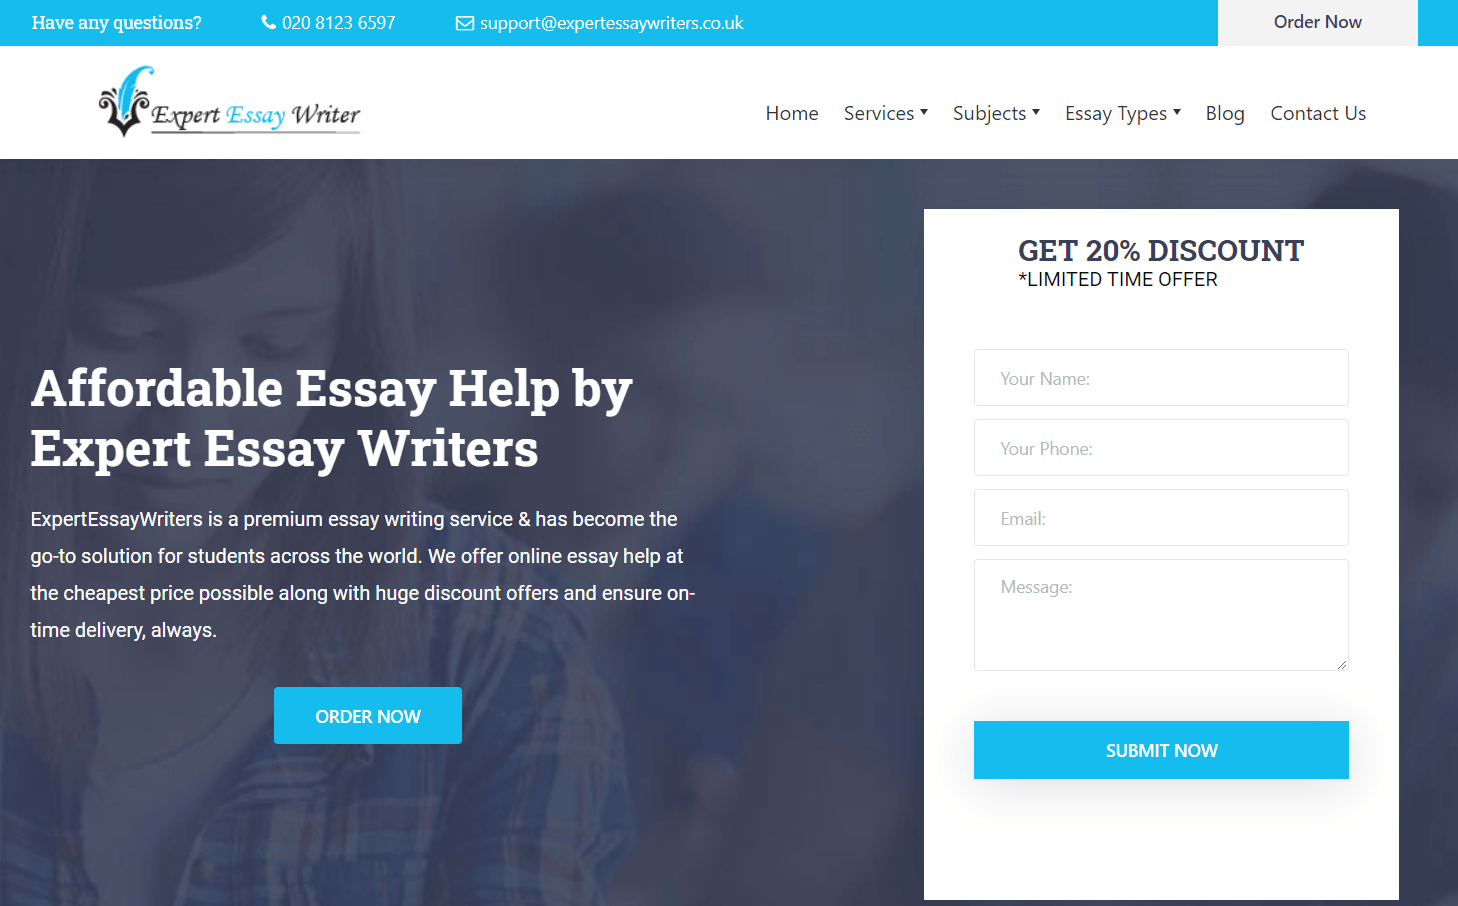 Best Essay Writing Services in UK - Trusted Reviews 